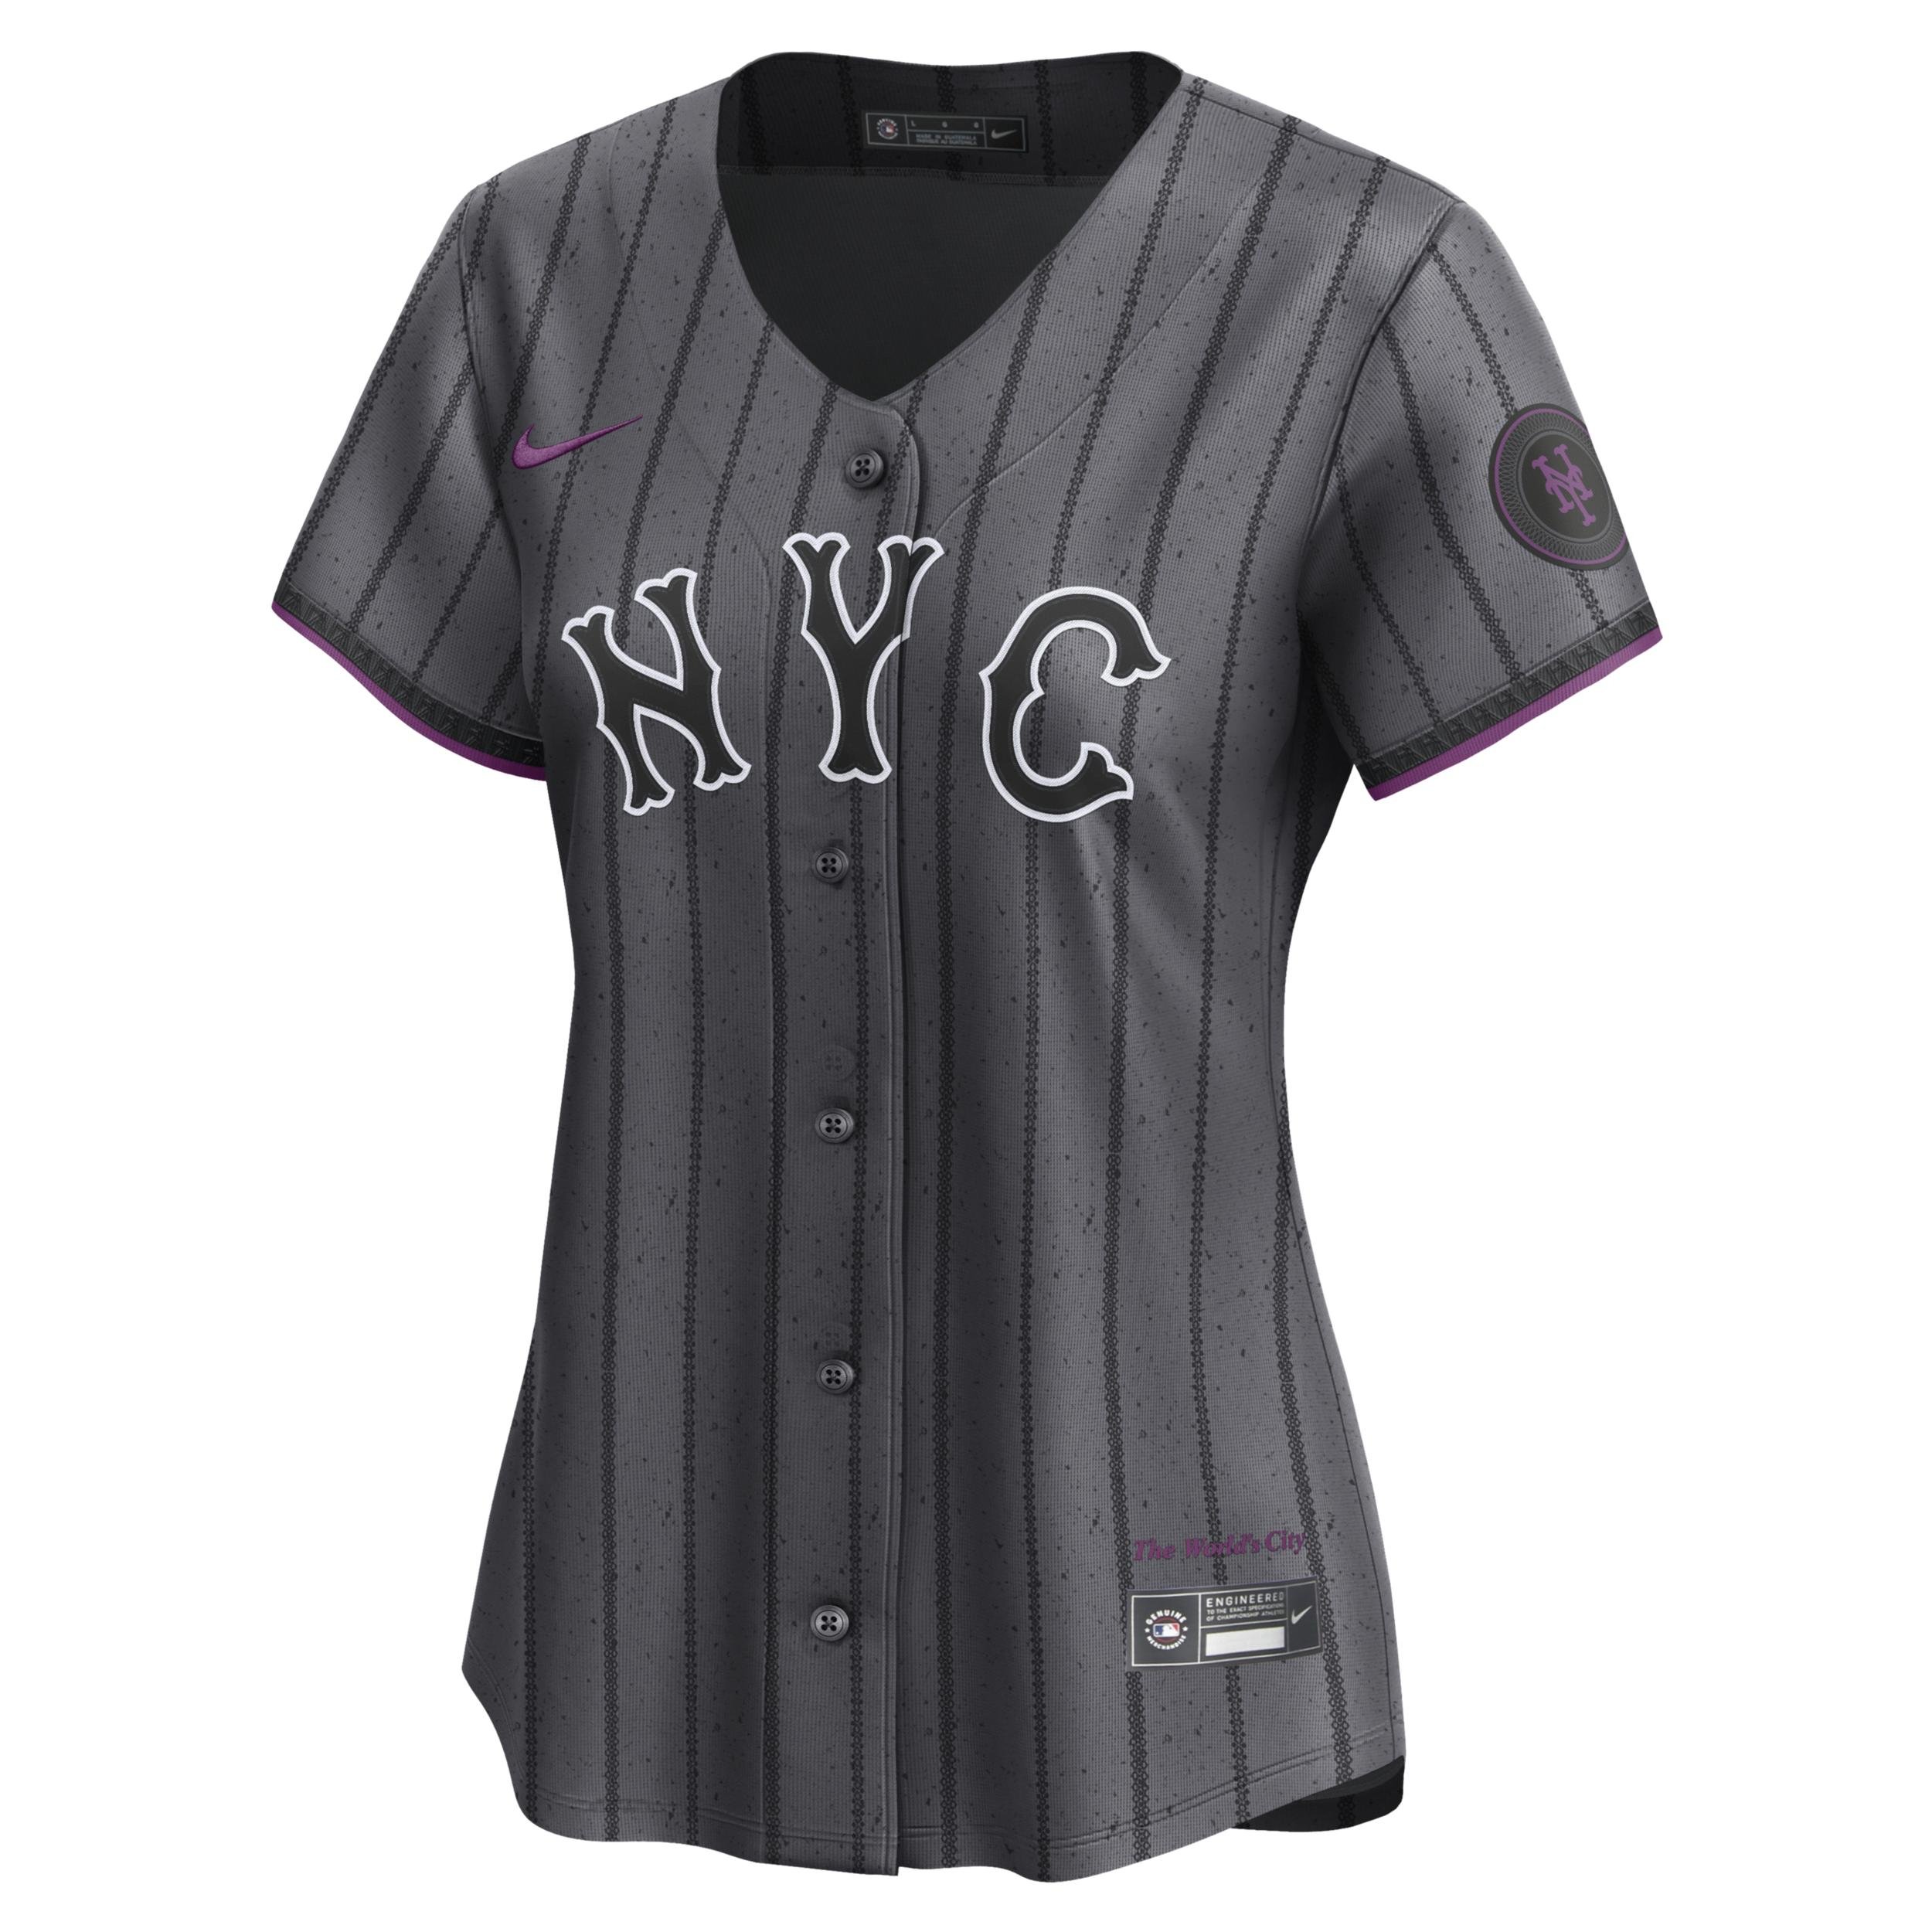 Pete Alonso New York Mets City Connect Nike Women's Dri-FIT ADV MLB Limited Jersey by NIKE